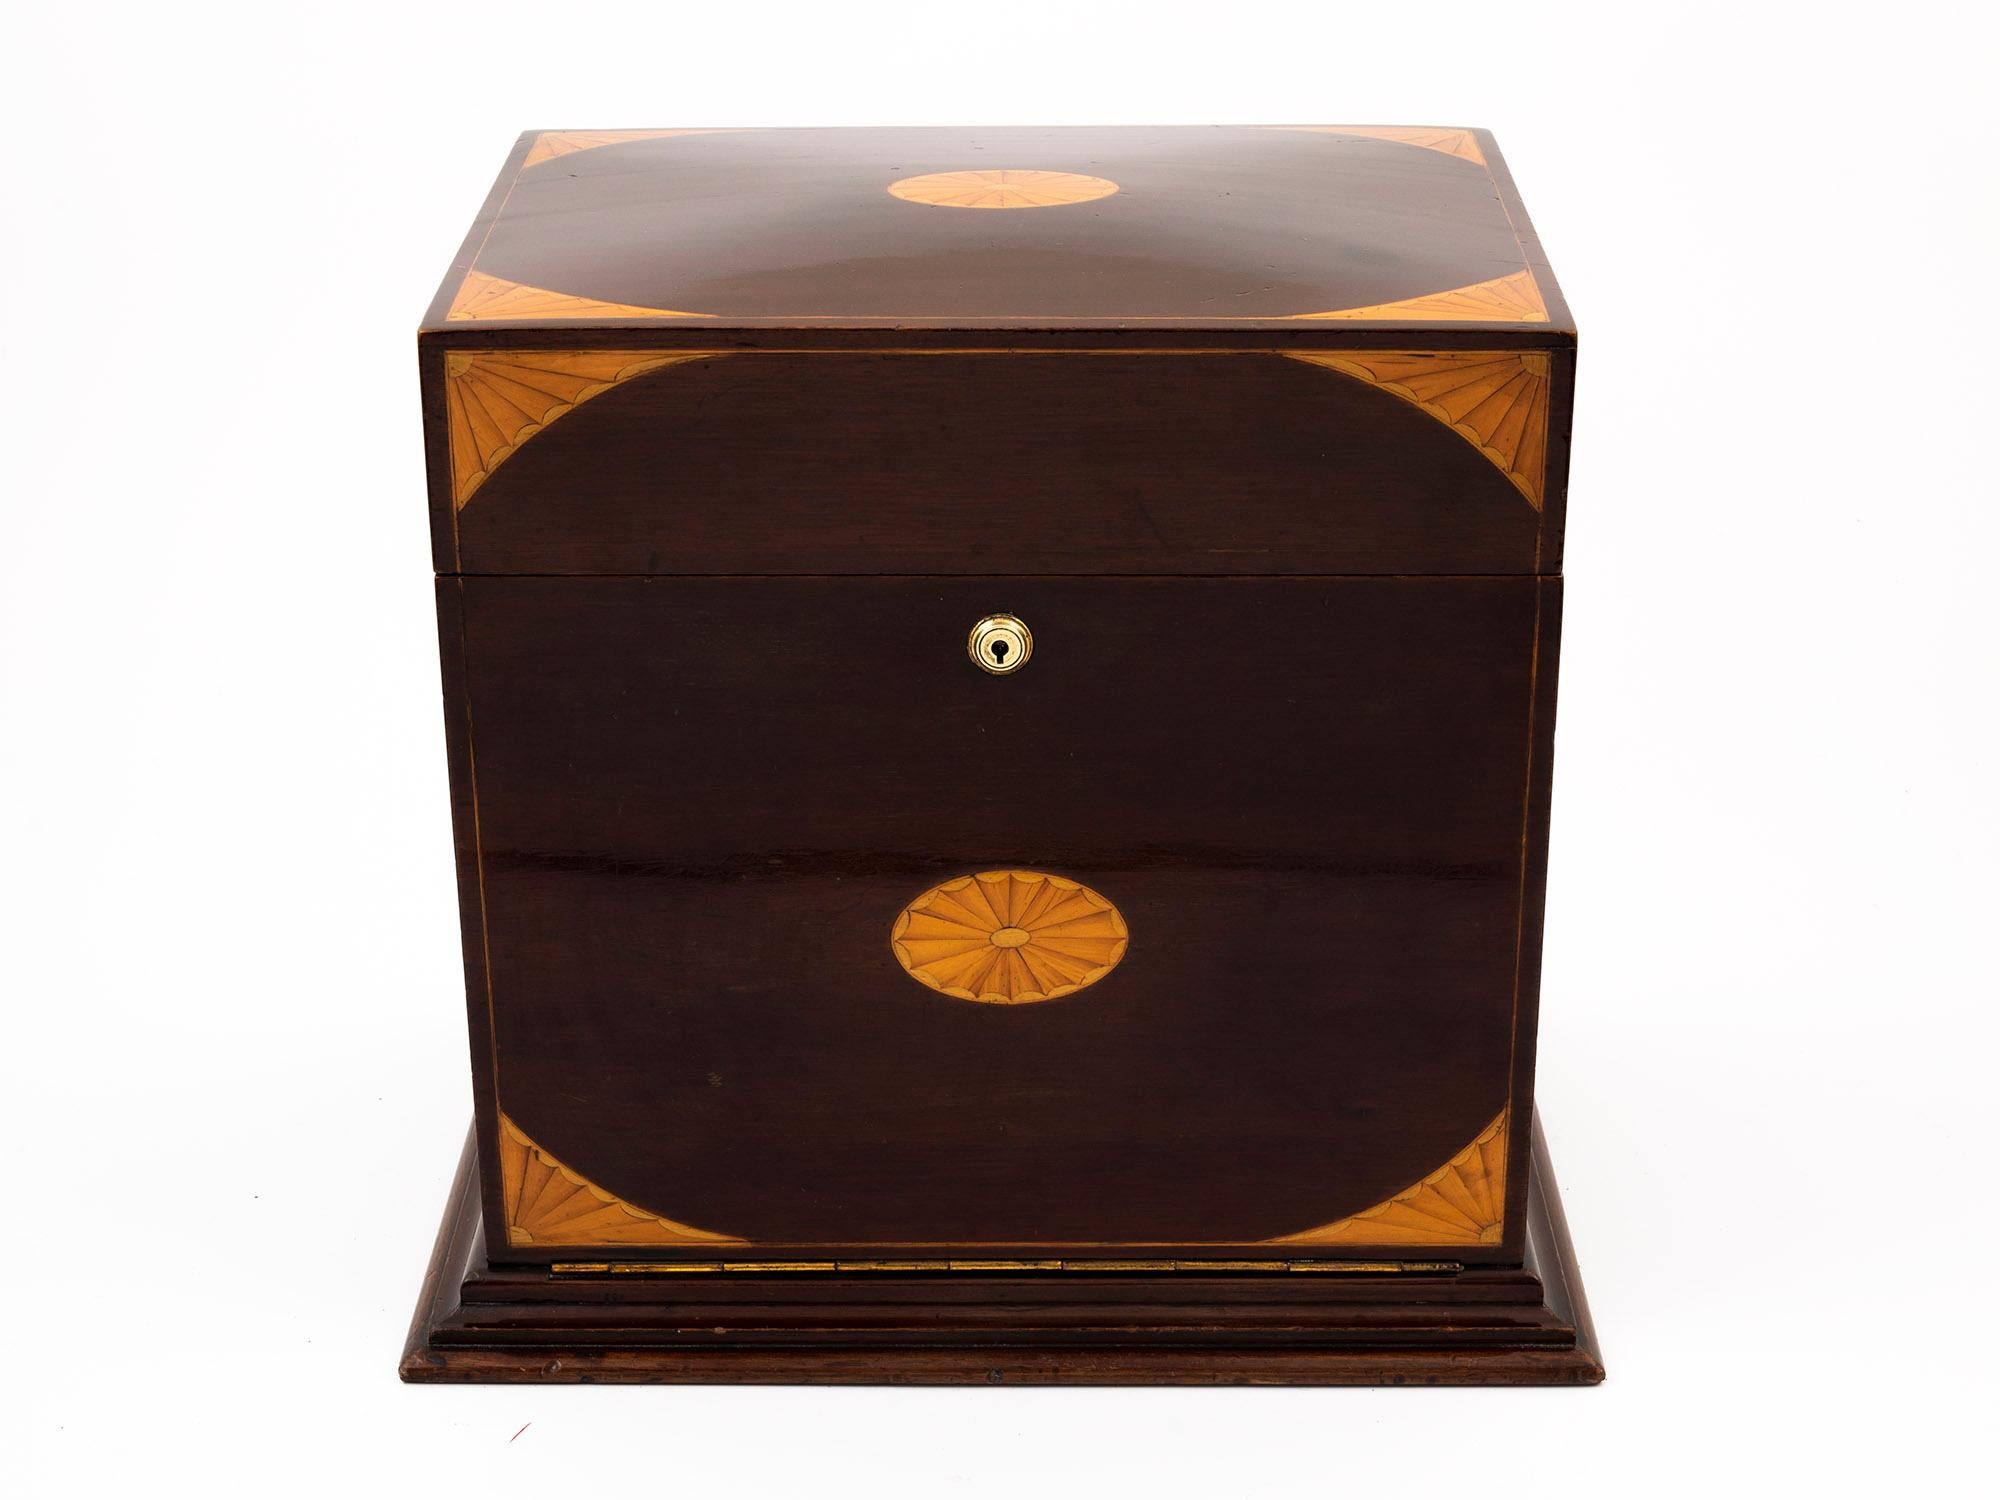 From our Boxes collection, we are delighted to offer this Victorian Mahogany Entertainment Box. The Box of rectangular shape made from Mahogany with a stepped plinth base. The Box features quarter fan inlay to the front and top in all four corners